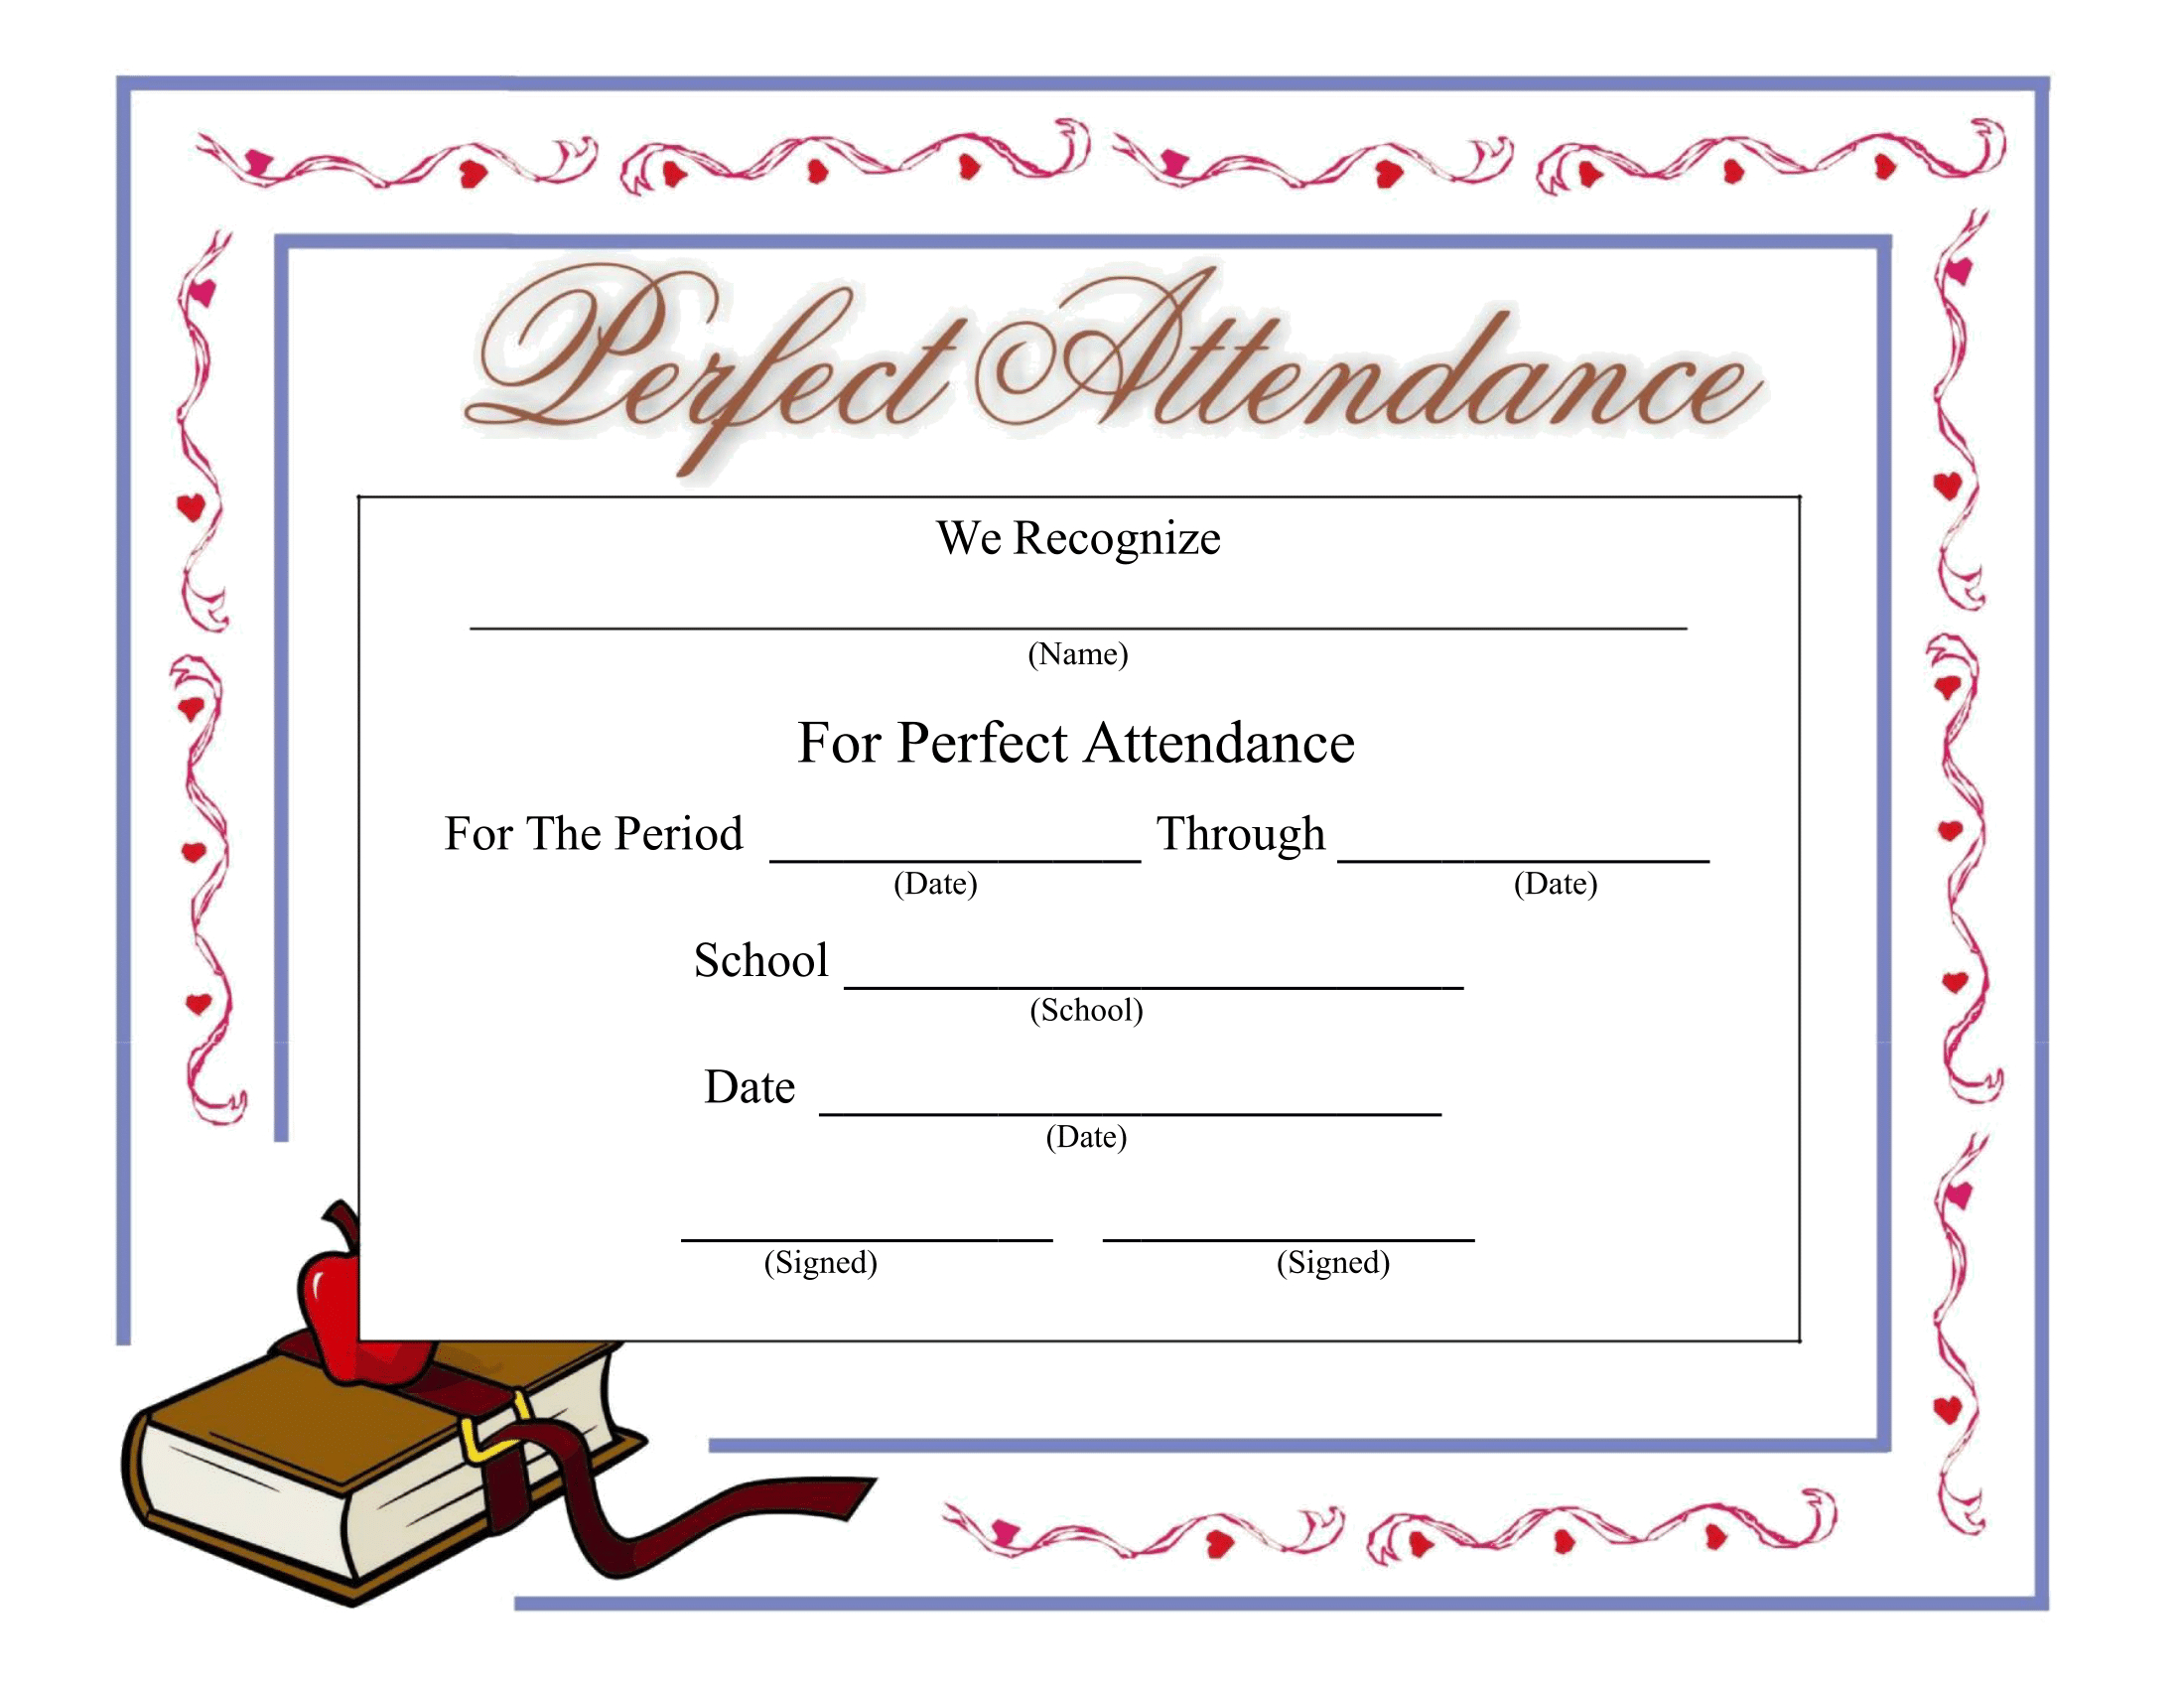 Perfect Attendance Certificate - Download A Free Template With Perfect Attendance Certificate Free Template